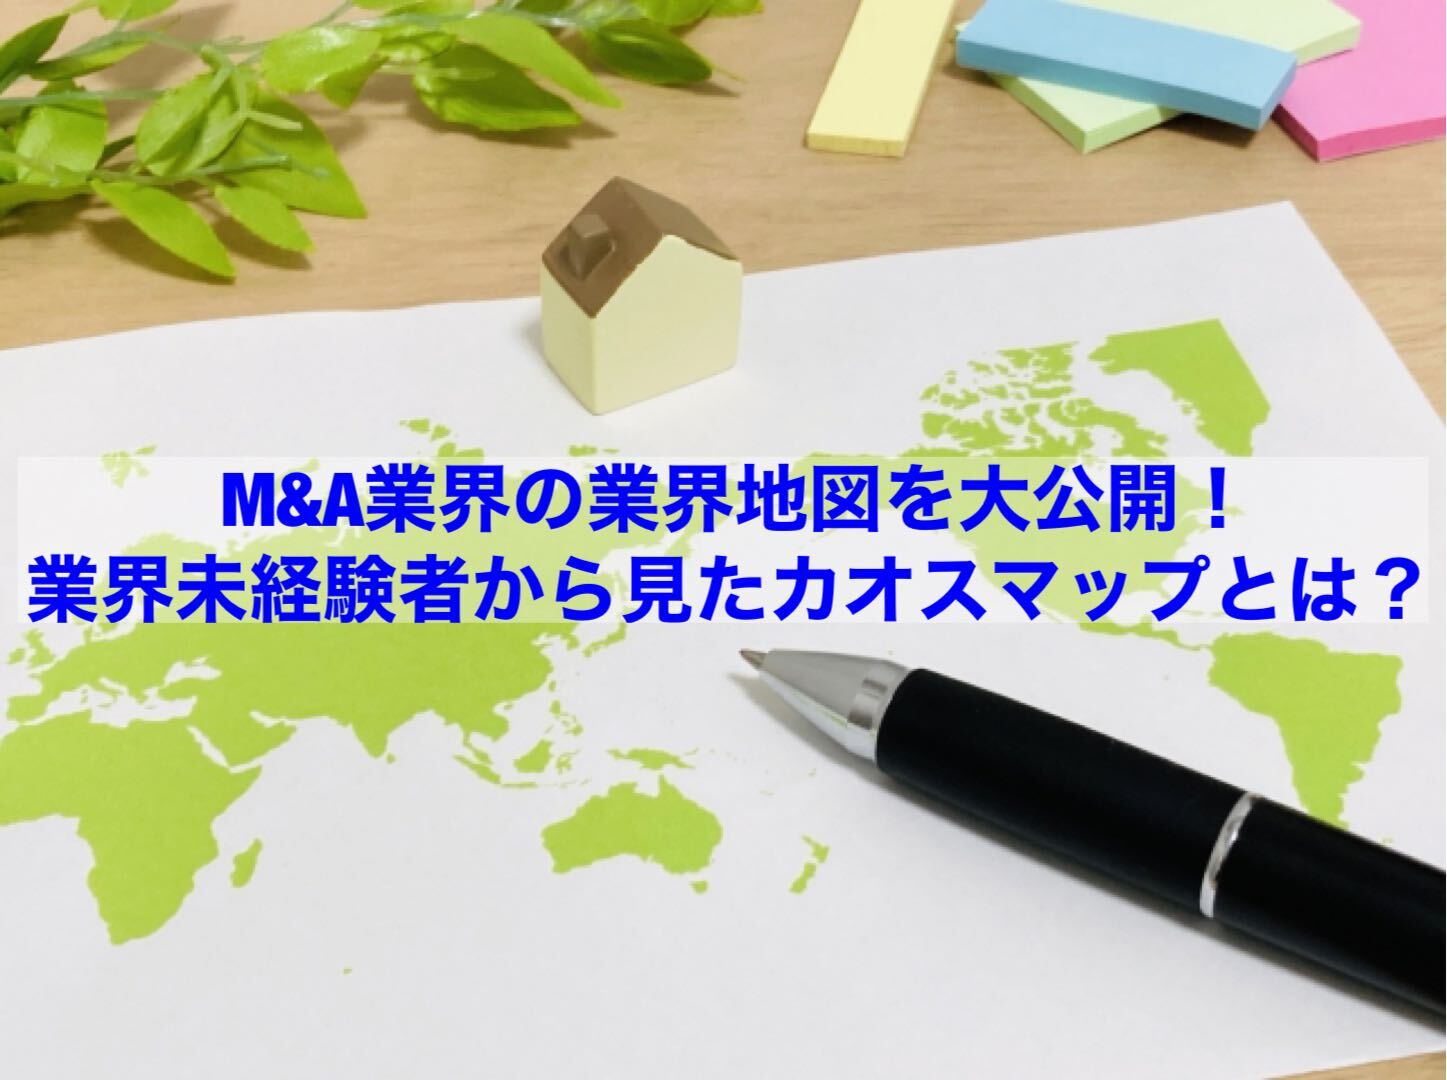 You are currently viewing 【転職情報】Ｍ＆Ａ業界の業界地図を大公開！業界未経験者から見たカオスマップとは？